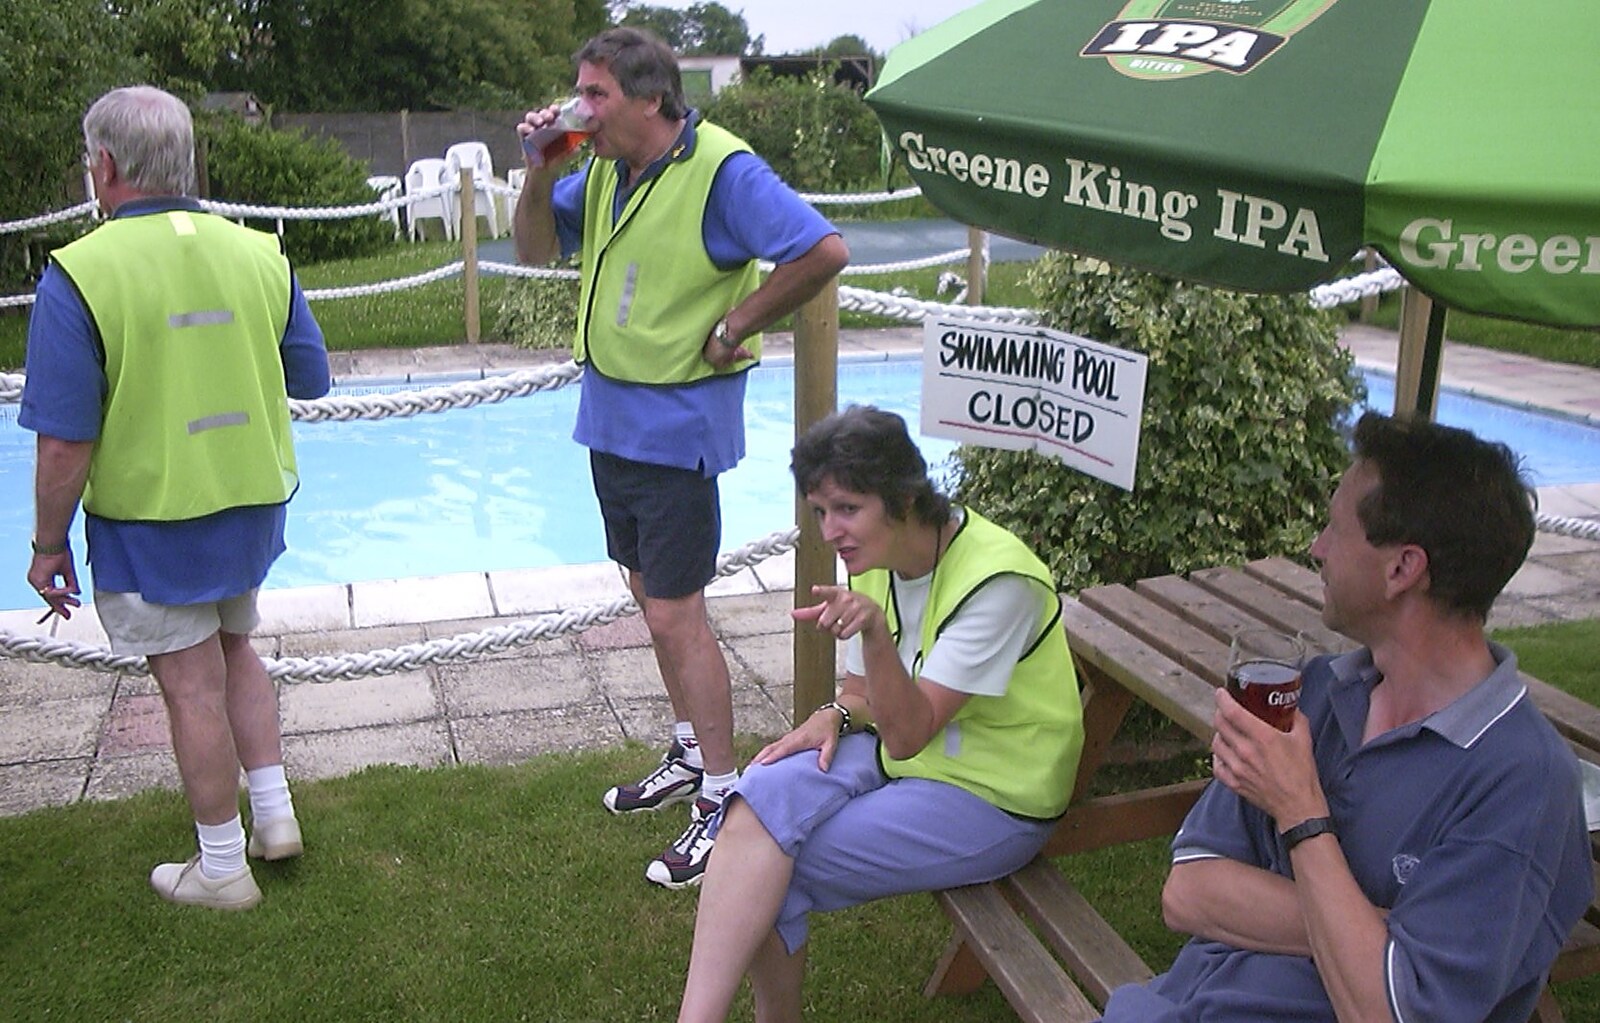 Ipswich Music Day and the BSCC in Cotton, Suffolk - 6th July 2003: Alan has a slurp in front of the swimming pool